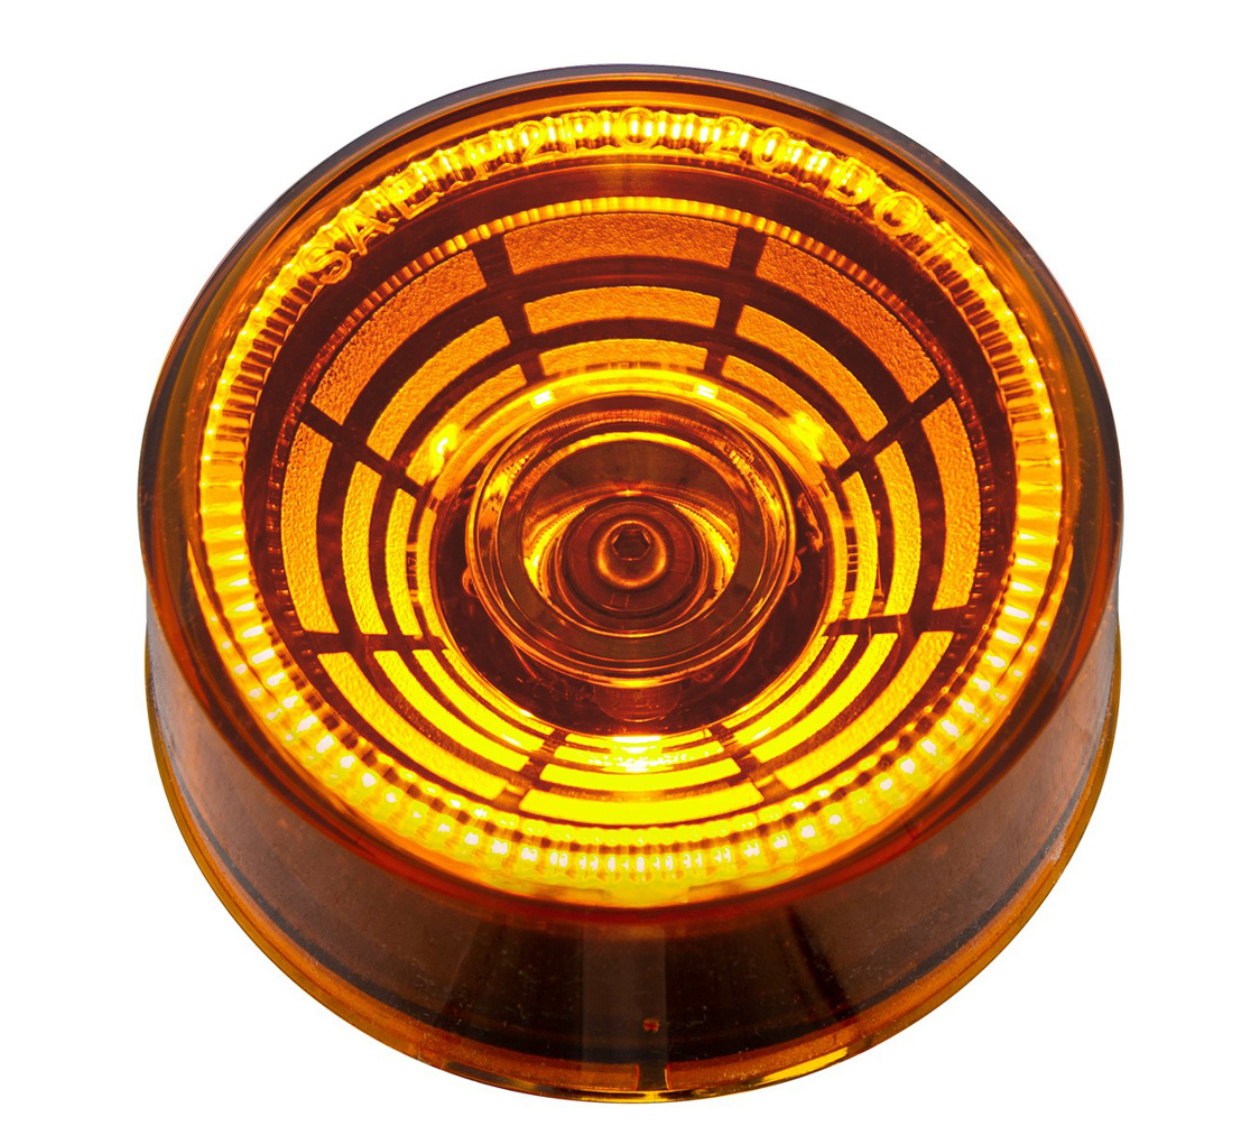 4 LED 2 1/2" Round Abyss Light (Clearance/Marker) - Amber LED/Amber Lens